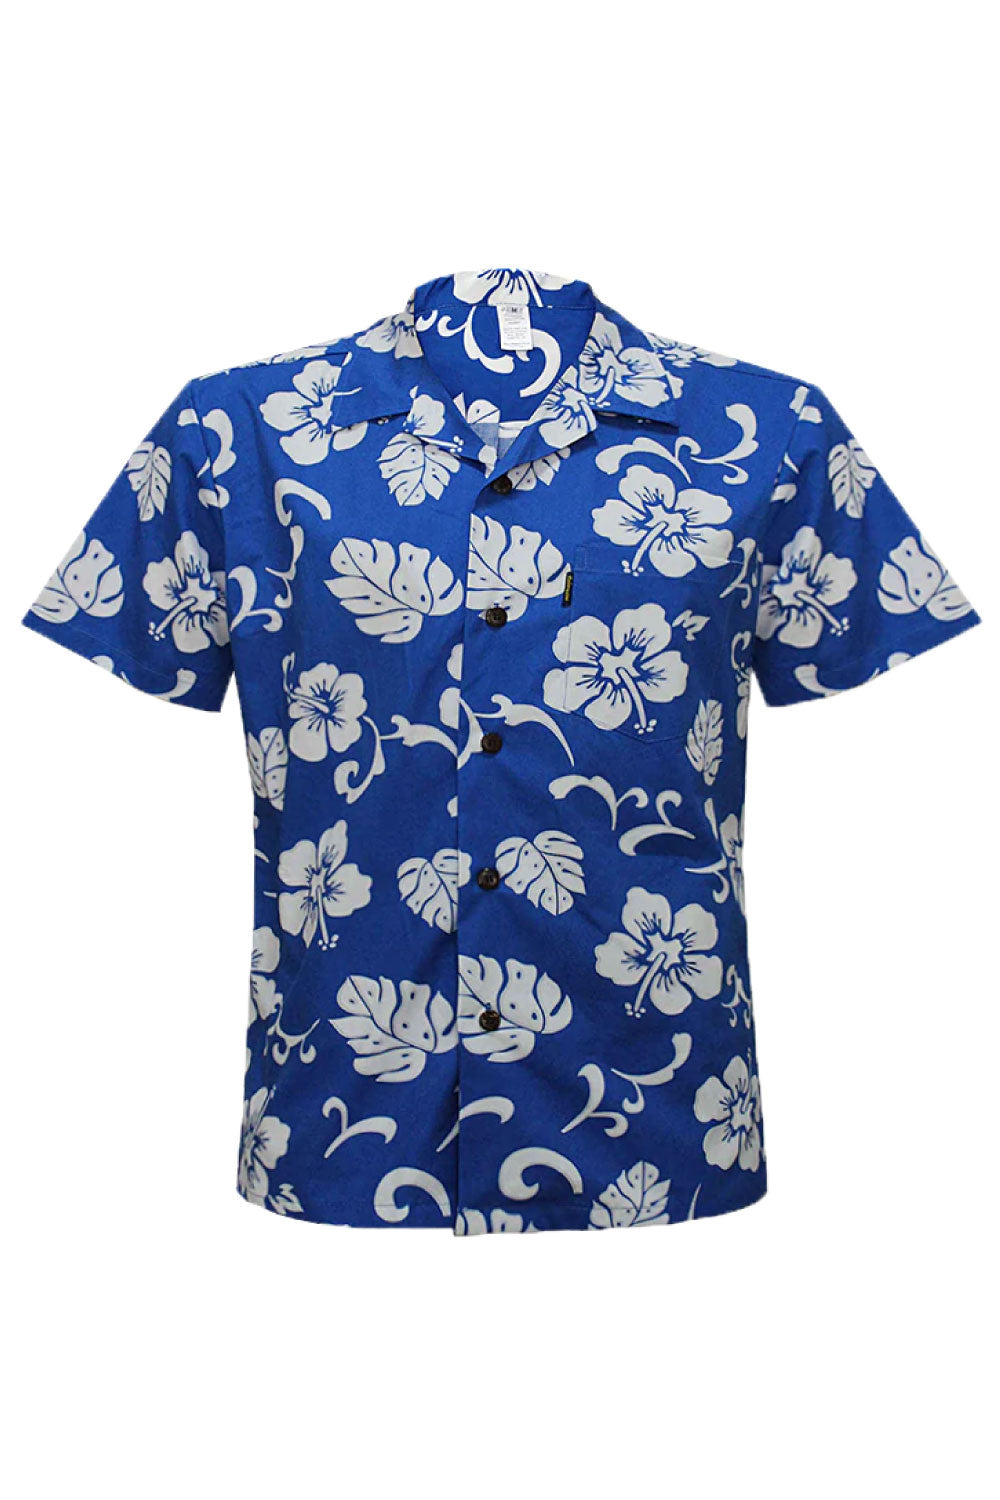 Image of the front of Palmwave's Royal Blue Hibiscus Aloha Men's Shirt.